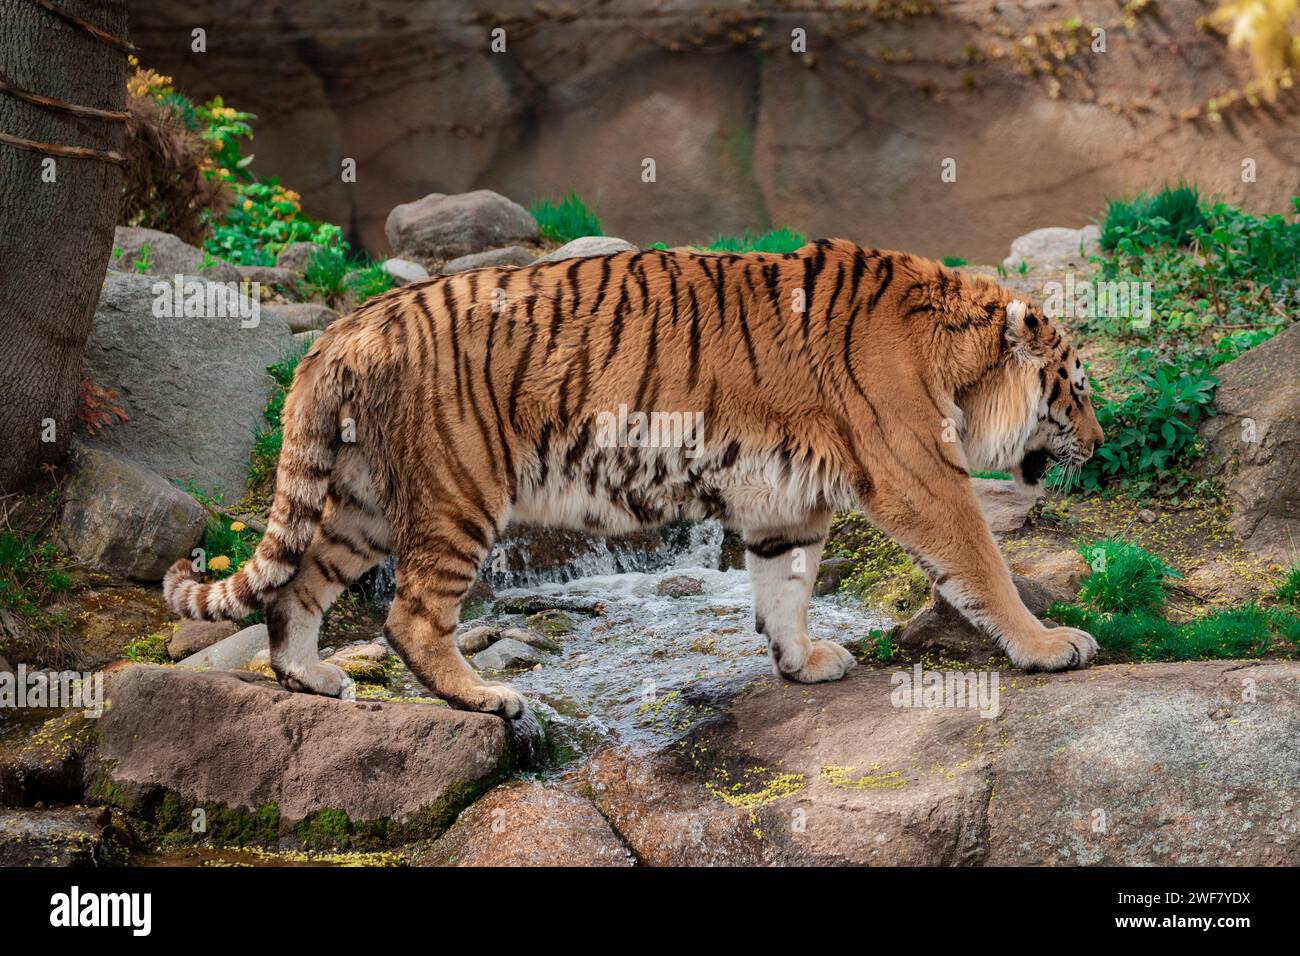 A tiger strolling near water and trees on rocky terrain Stock Photo